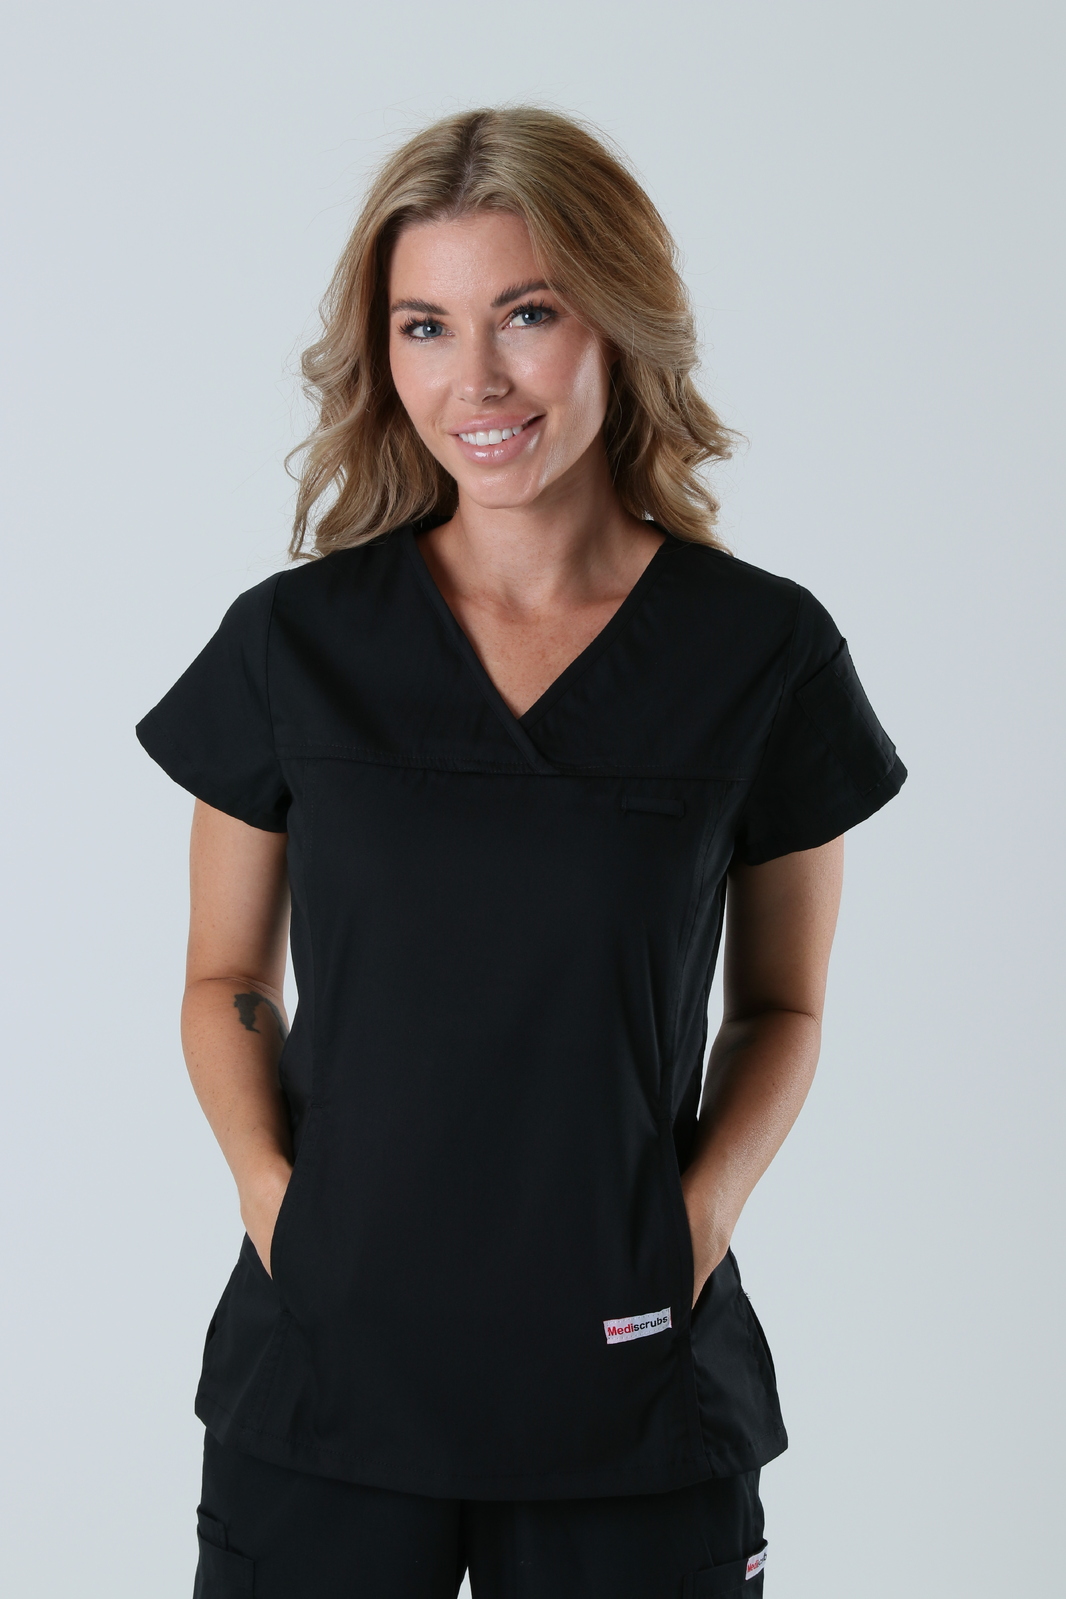 St Vincent's Hospital Emergency Department Emergency Physician Uniform Top Only Bundle (Women's Fit Solid in Black incl logos)